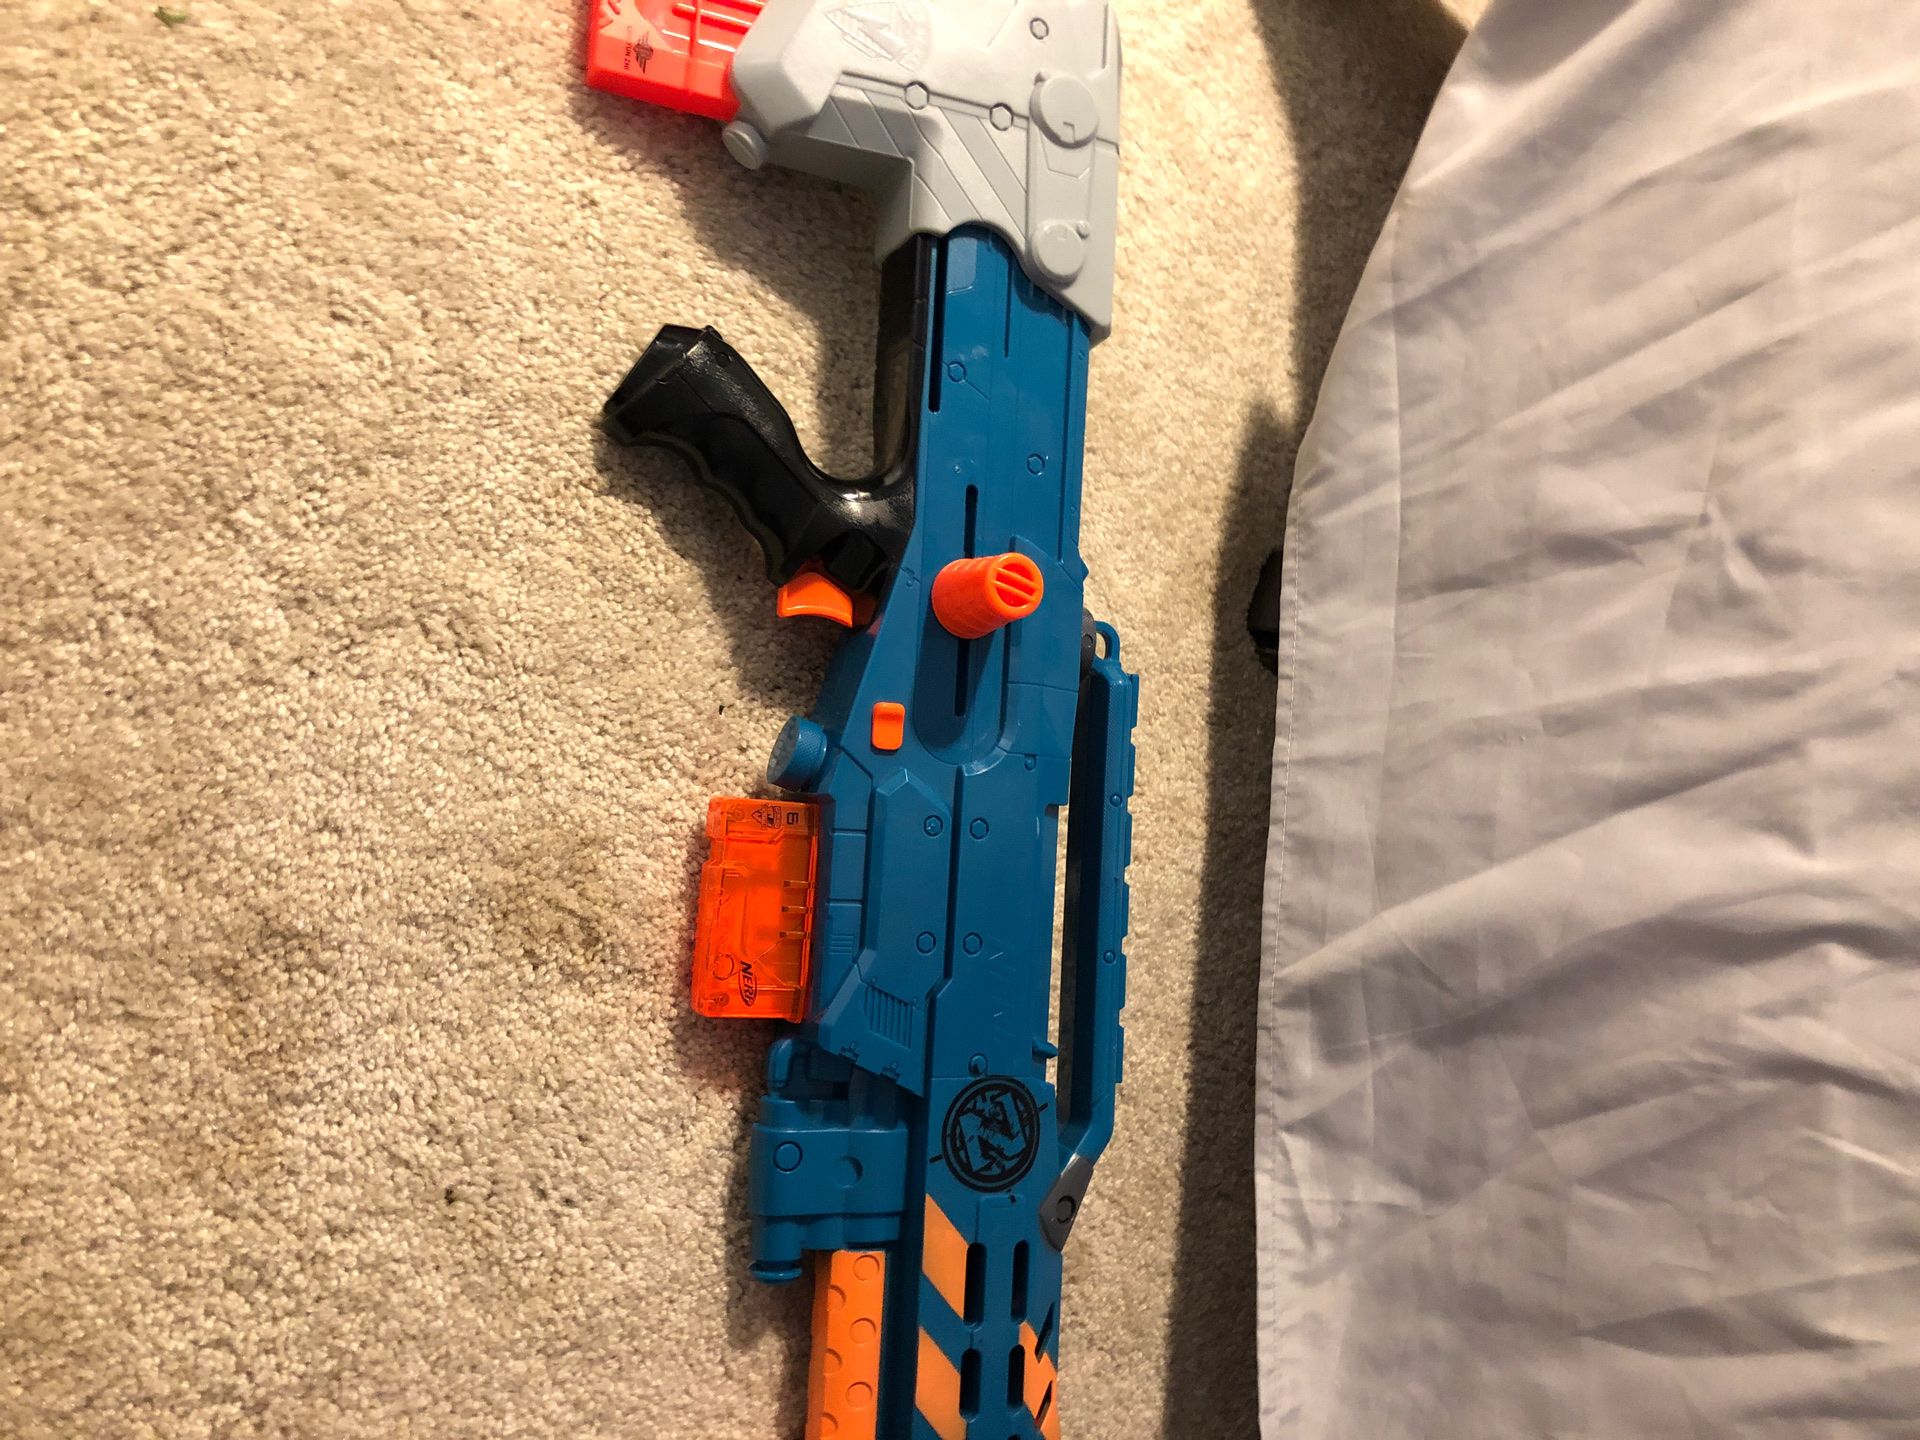 Nerf gun comes with 2 amp clips and 12bullets